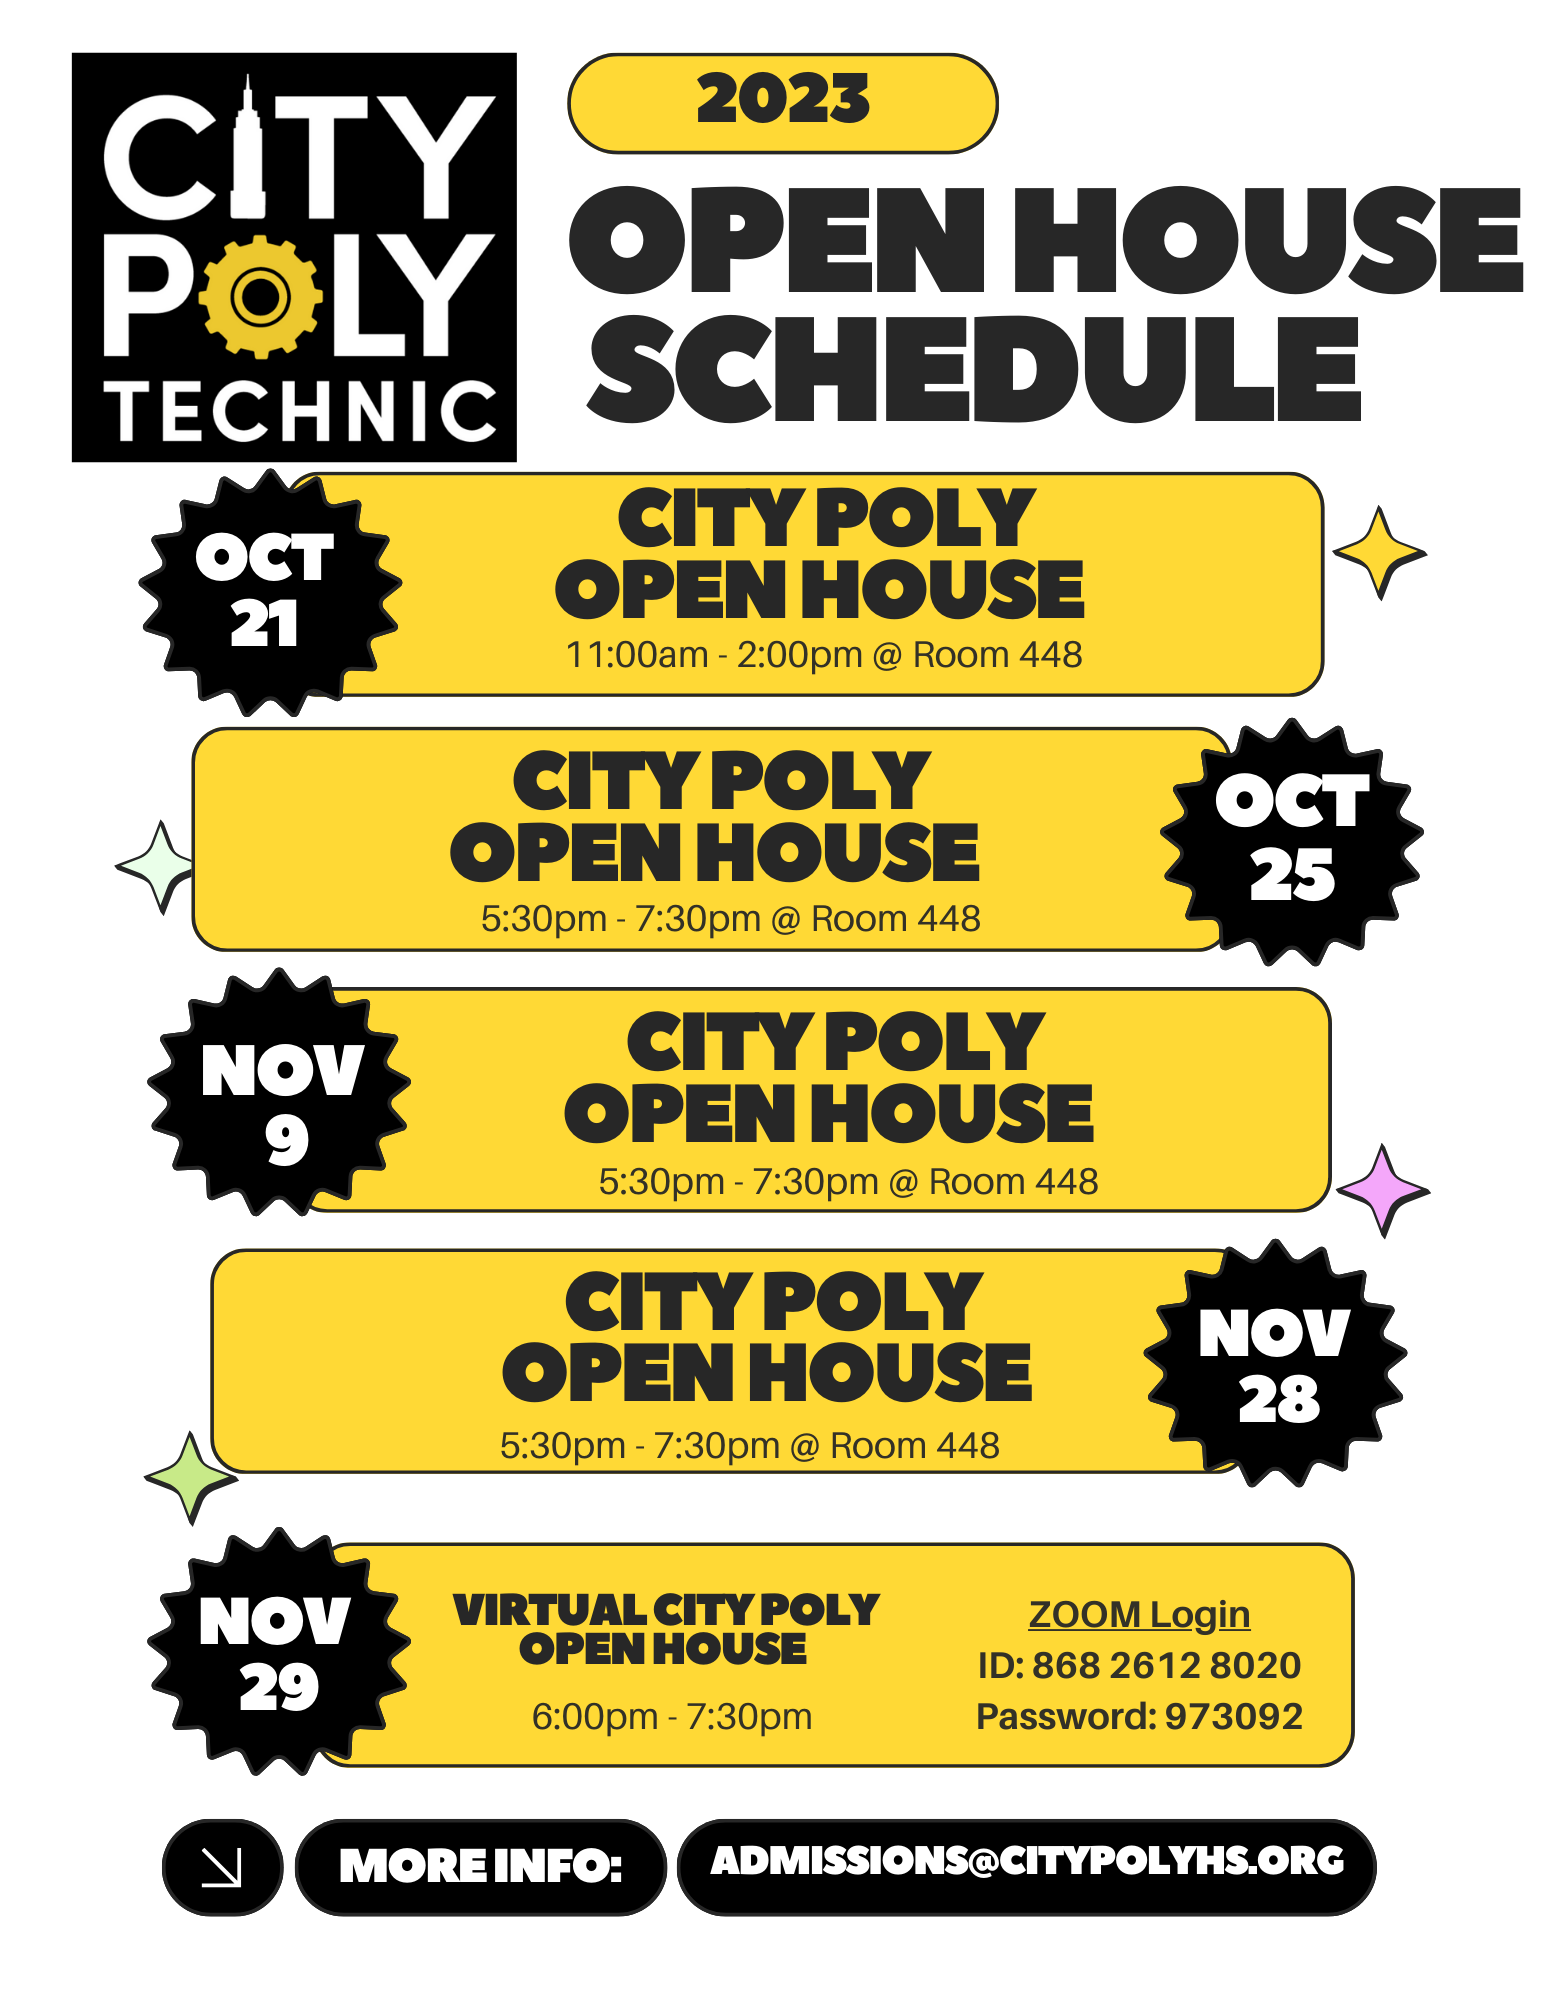 Open house October 21 and 25,November 9 and 28 more information admin@citypolyhs.org